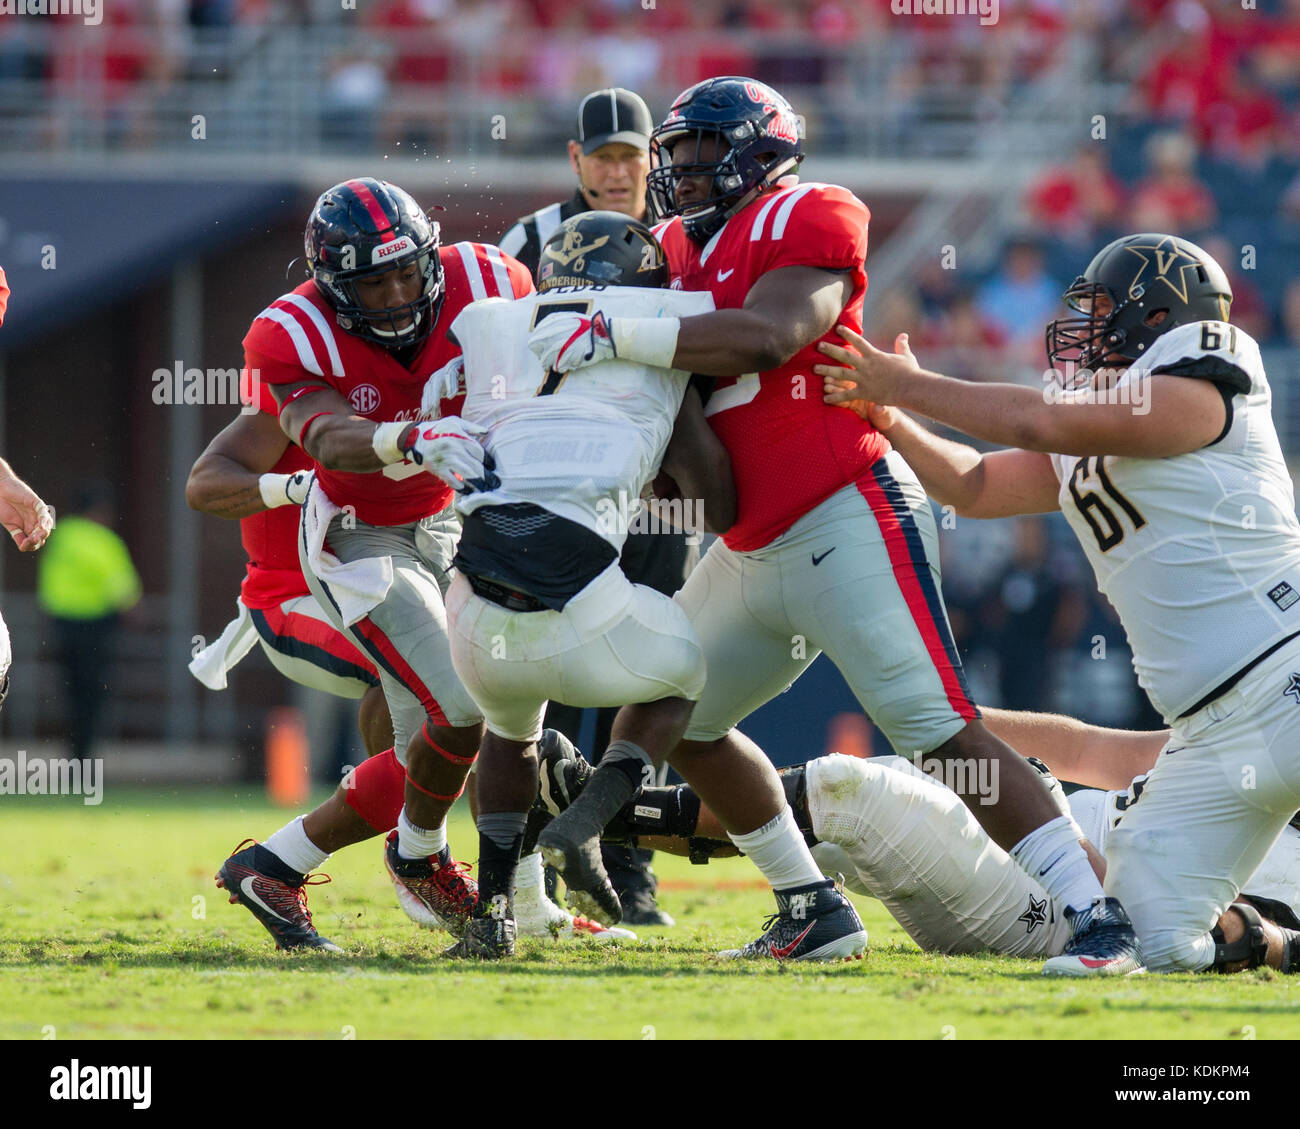 Oxford, USA.  14th October 2017. University of Mississippi Linebacker DeMarquis Gates (3) and Defensive Tackle Ross Donelly (90) stop and bring down Vanderbilt Running Back Ralph Webb (7) at Vaught-Hemingway Stadium in Oxford, Mississippi, on Saturday, October 14, 2107.  Credit: Kevin Williams/Alamy Live News. Stock Photo